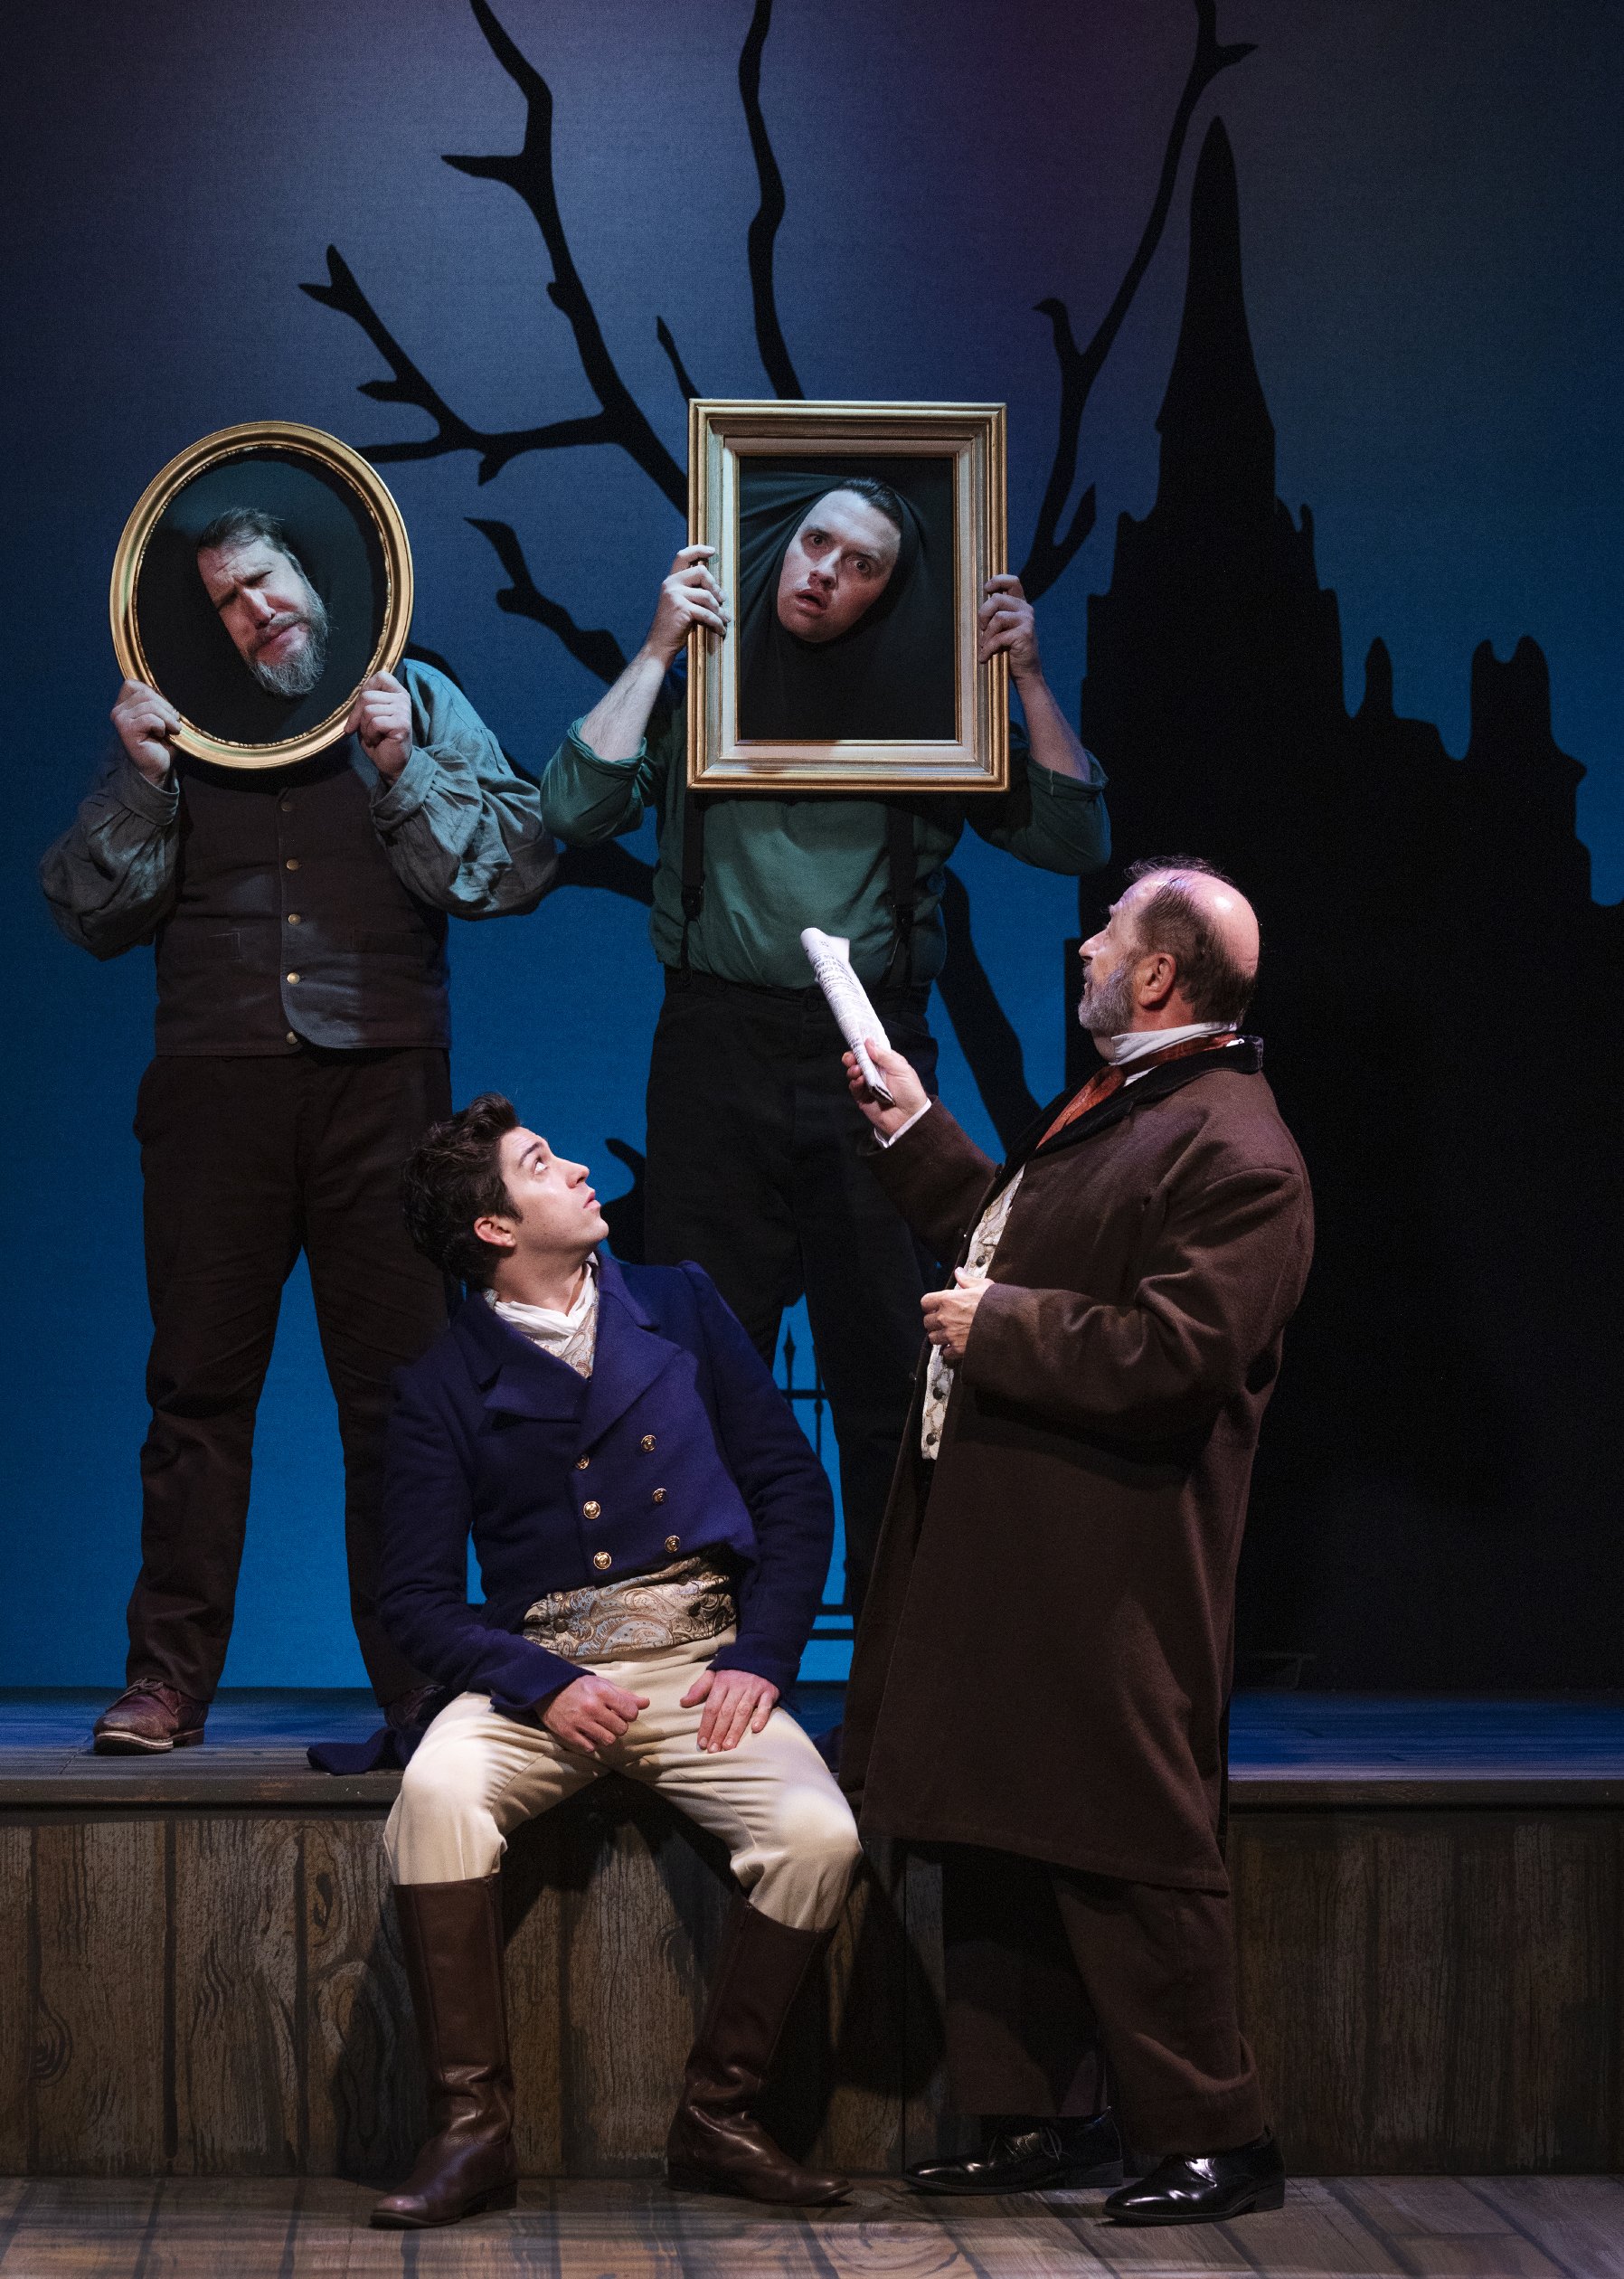 Hunter Hnat as Pip, Dennis O’Dell as Wemmick, and Matt Walley and Aaron Shand as Death Masks. Photo by Tim Fuller.